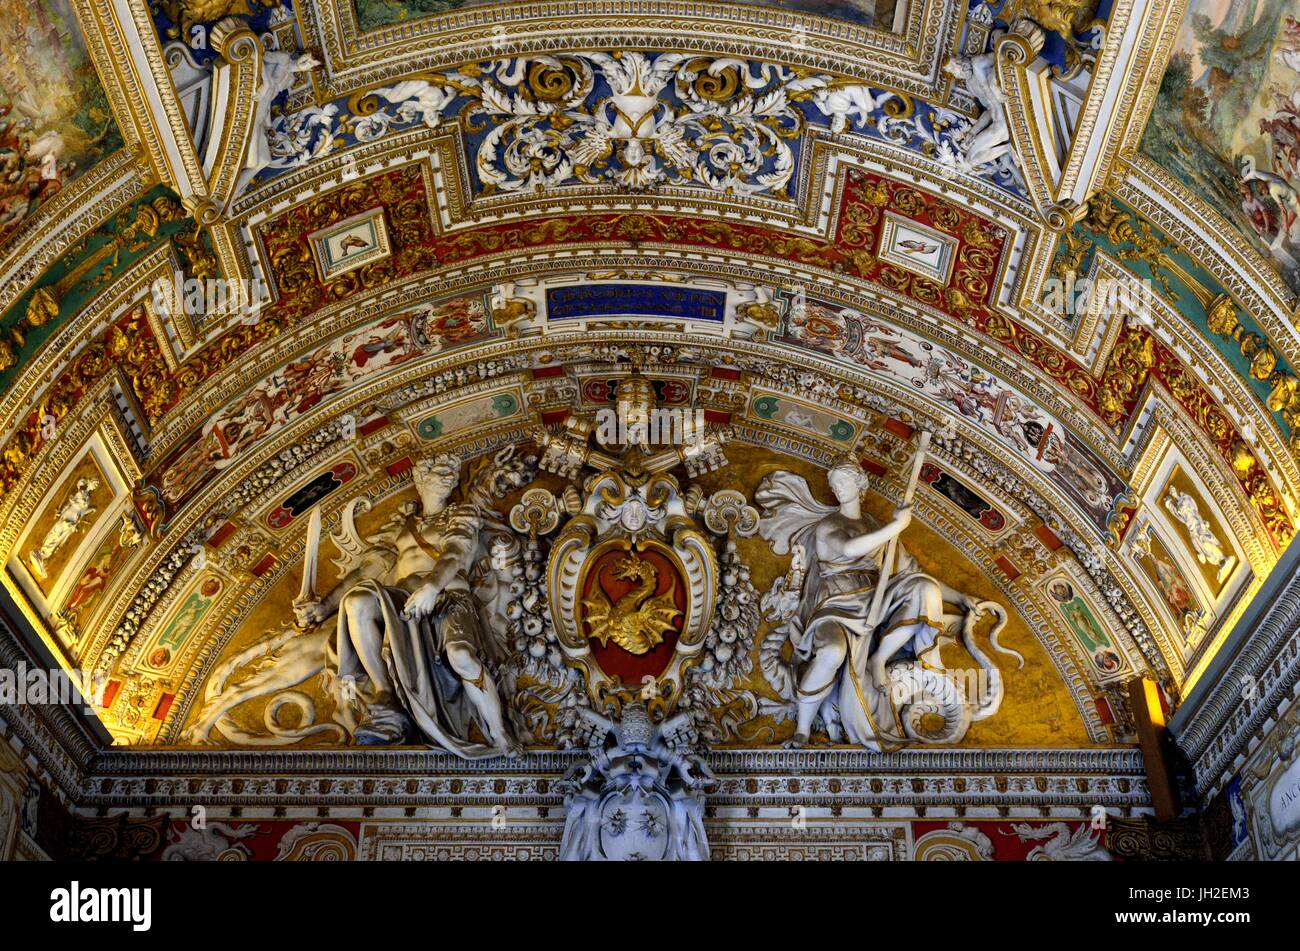 Renaissance period Paintings on the ceiling of St Peter's basilica in Vatican City, Rome, Italy Stock Photo